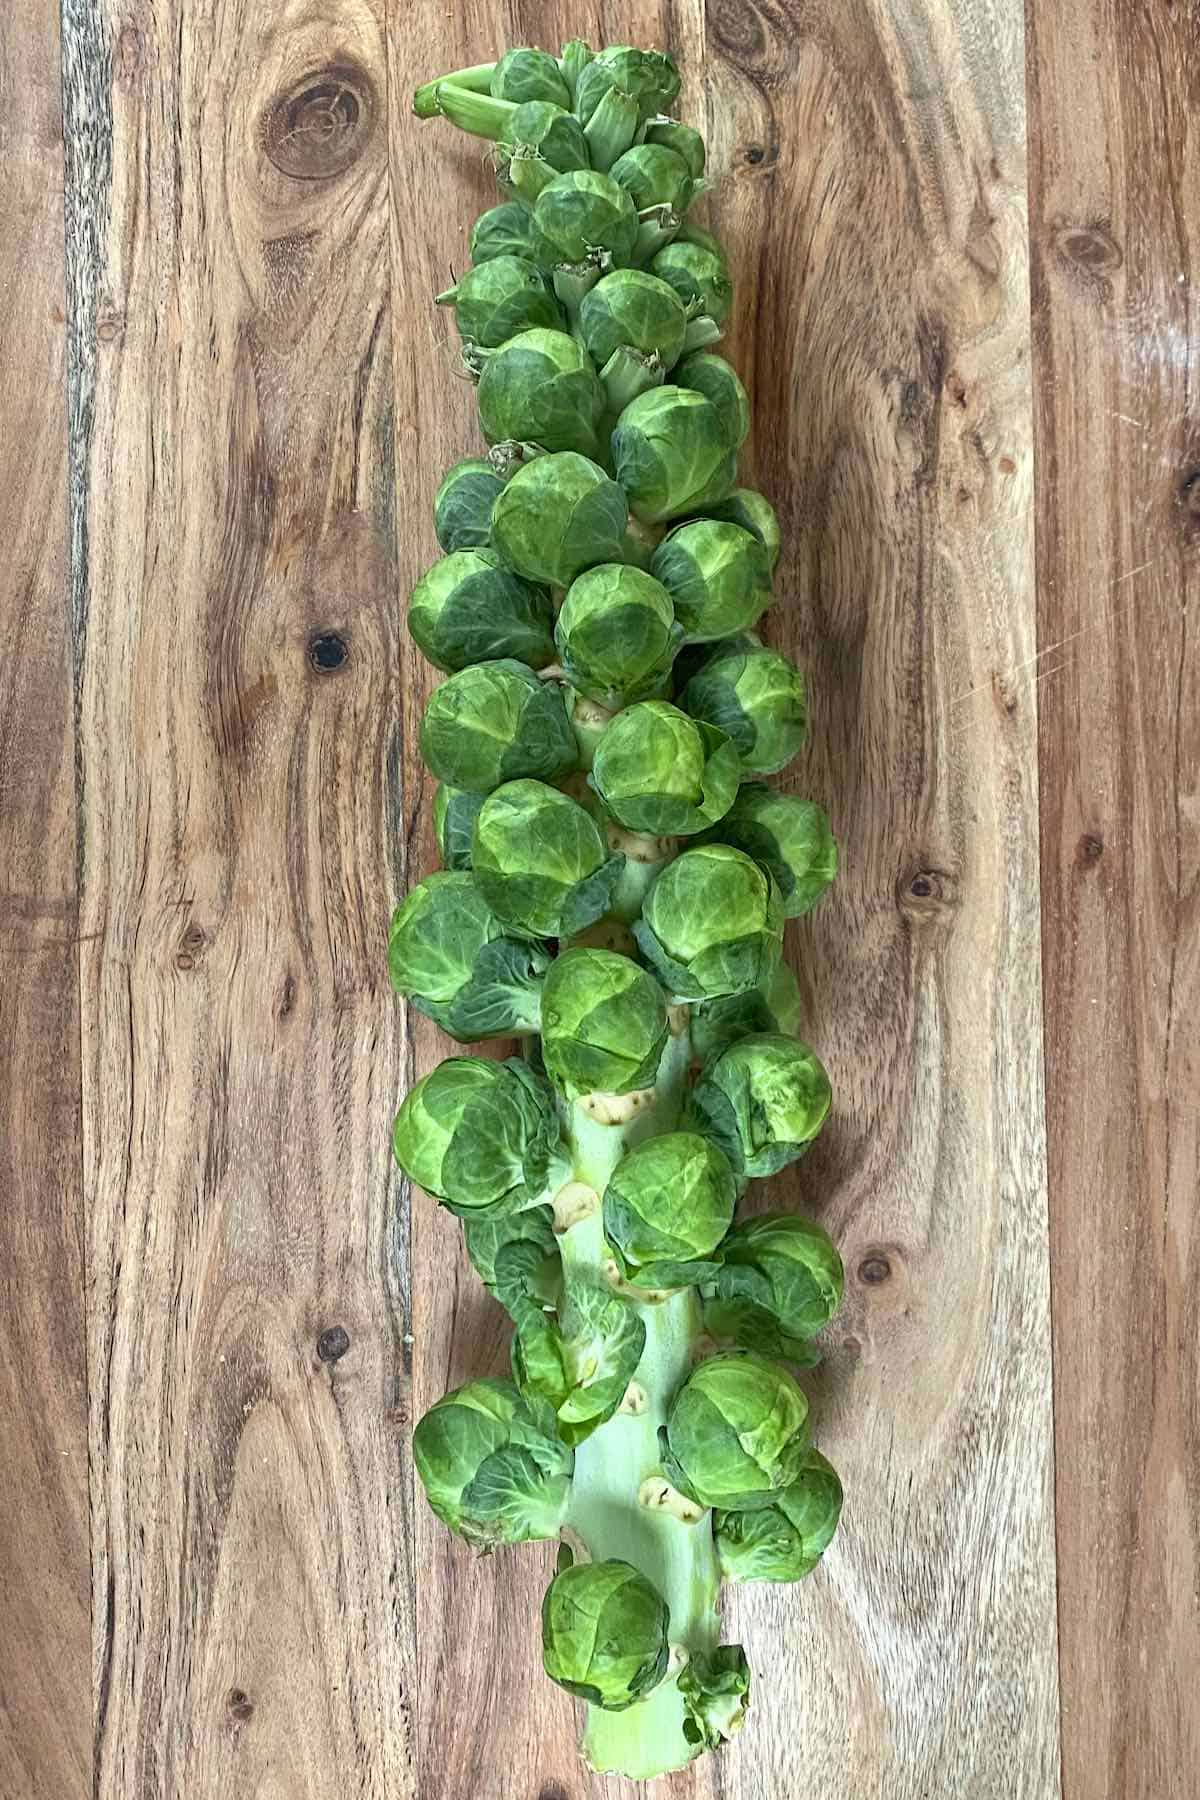 A branch with Brussels sprouts